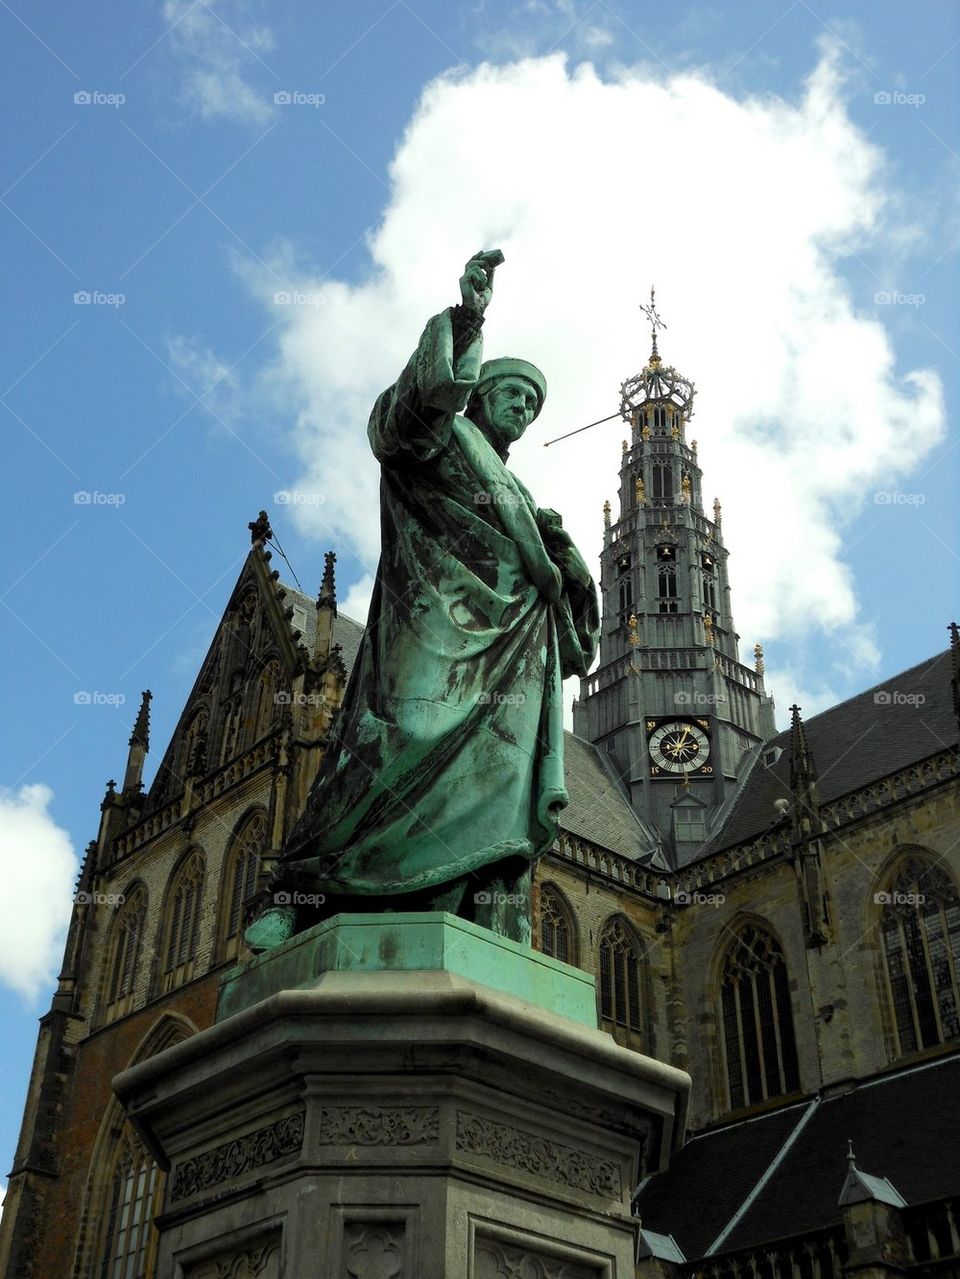 Statue in the Haarlem market square 